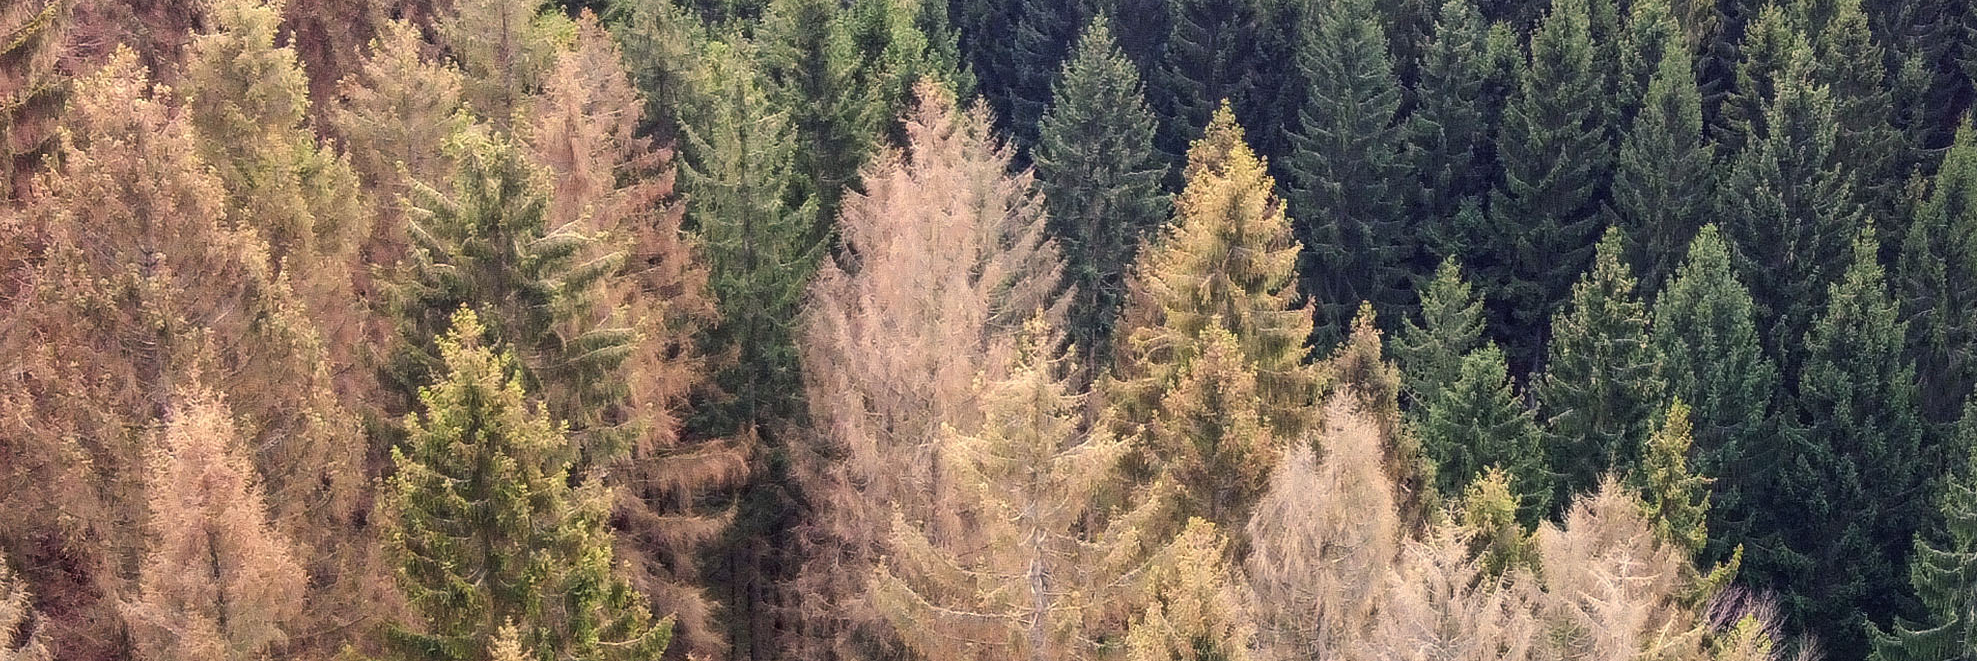 German wood Harz is destroyed by climate change.